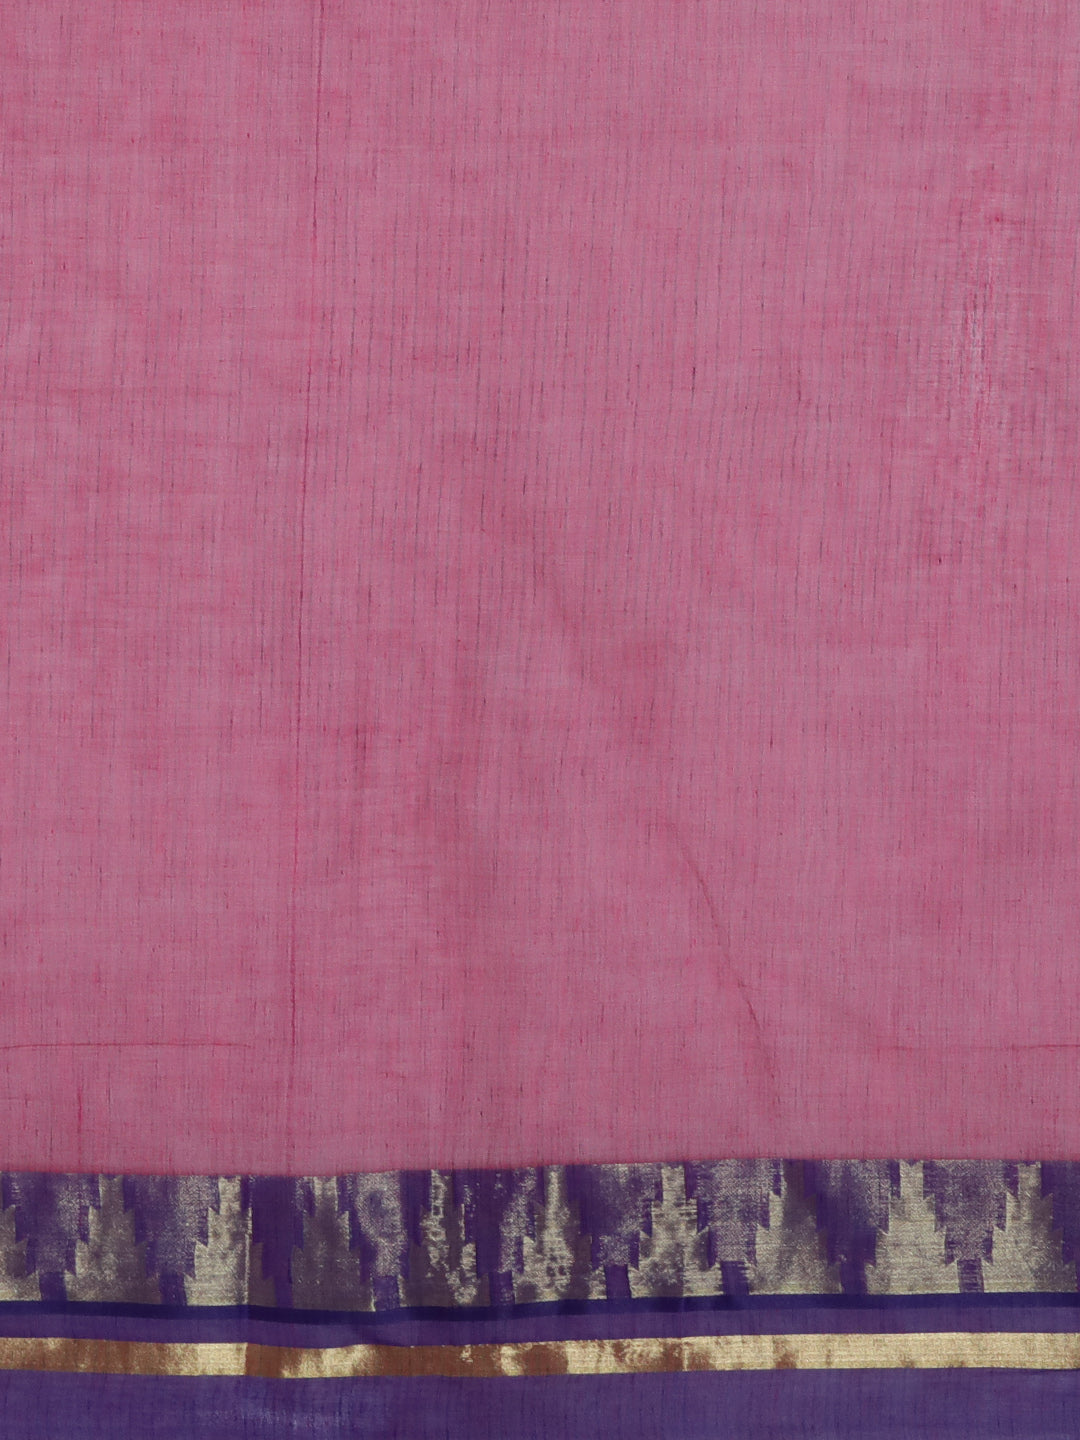 Purple Tant Woven Design Saree Without Blouse Piece DUTASA048 DUTASA048-Saree-Kalakari India-DUTASA048-Geographical Indication, Hand Crafted, Heritage Prints, Natural Dyes, Sarees, Silk Cotton, Sustainable Fabrics, Taant, Tant, West Bengal, Woven-[Linen,Ethnic,wear,Fashionista,Handloom,Handicraft,Indigo,blockprint,block,print,Cotton,Chanderi,Blue, latest,classy,party,bollywood,trendy,summer,style,traditional,formal,elegant,unique,style,hand,block,print, dabu,booti,gift,present,glamorous,affordab